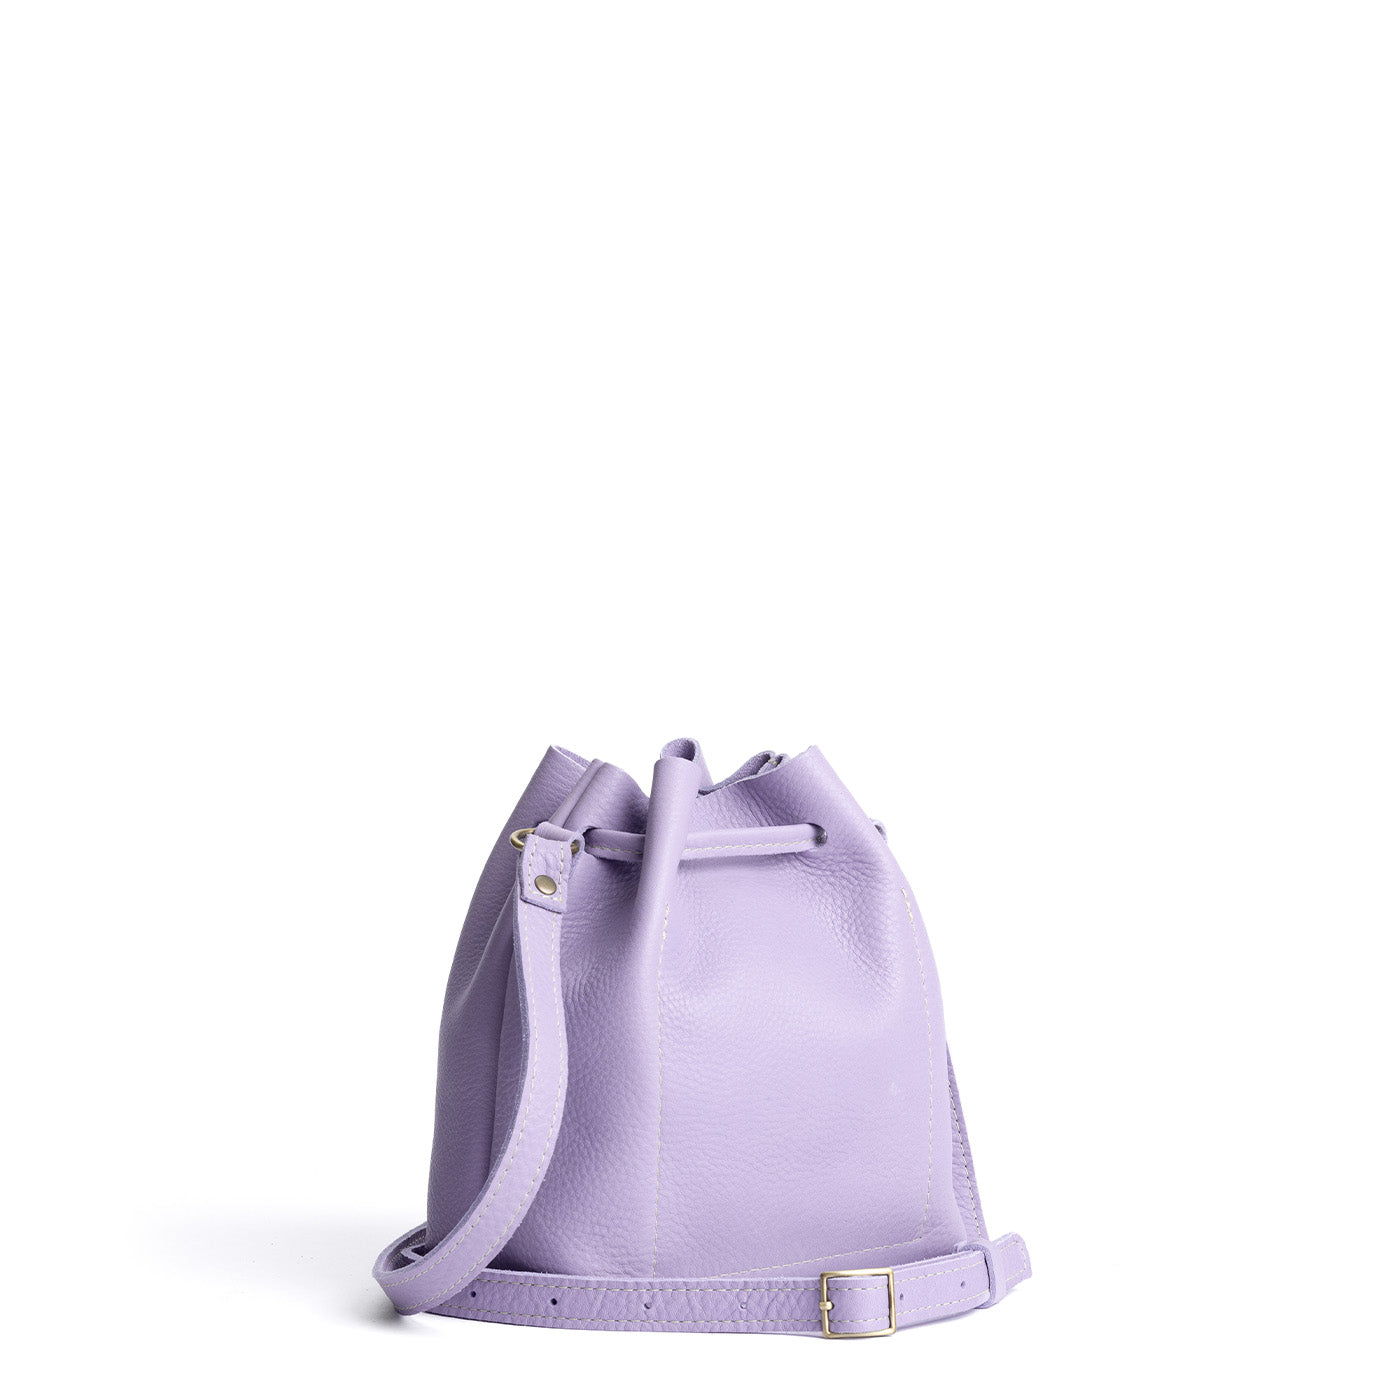 Wisteria*Small | Slouchy crossbody bag with drawstring closure